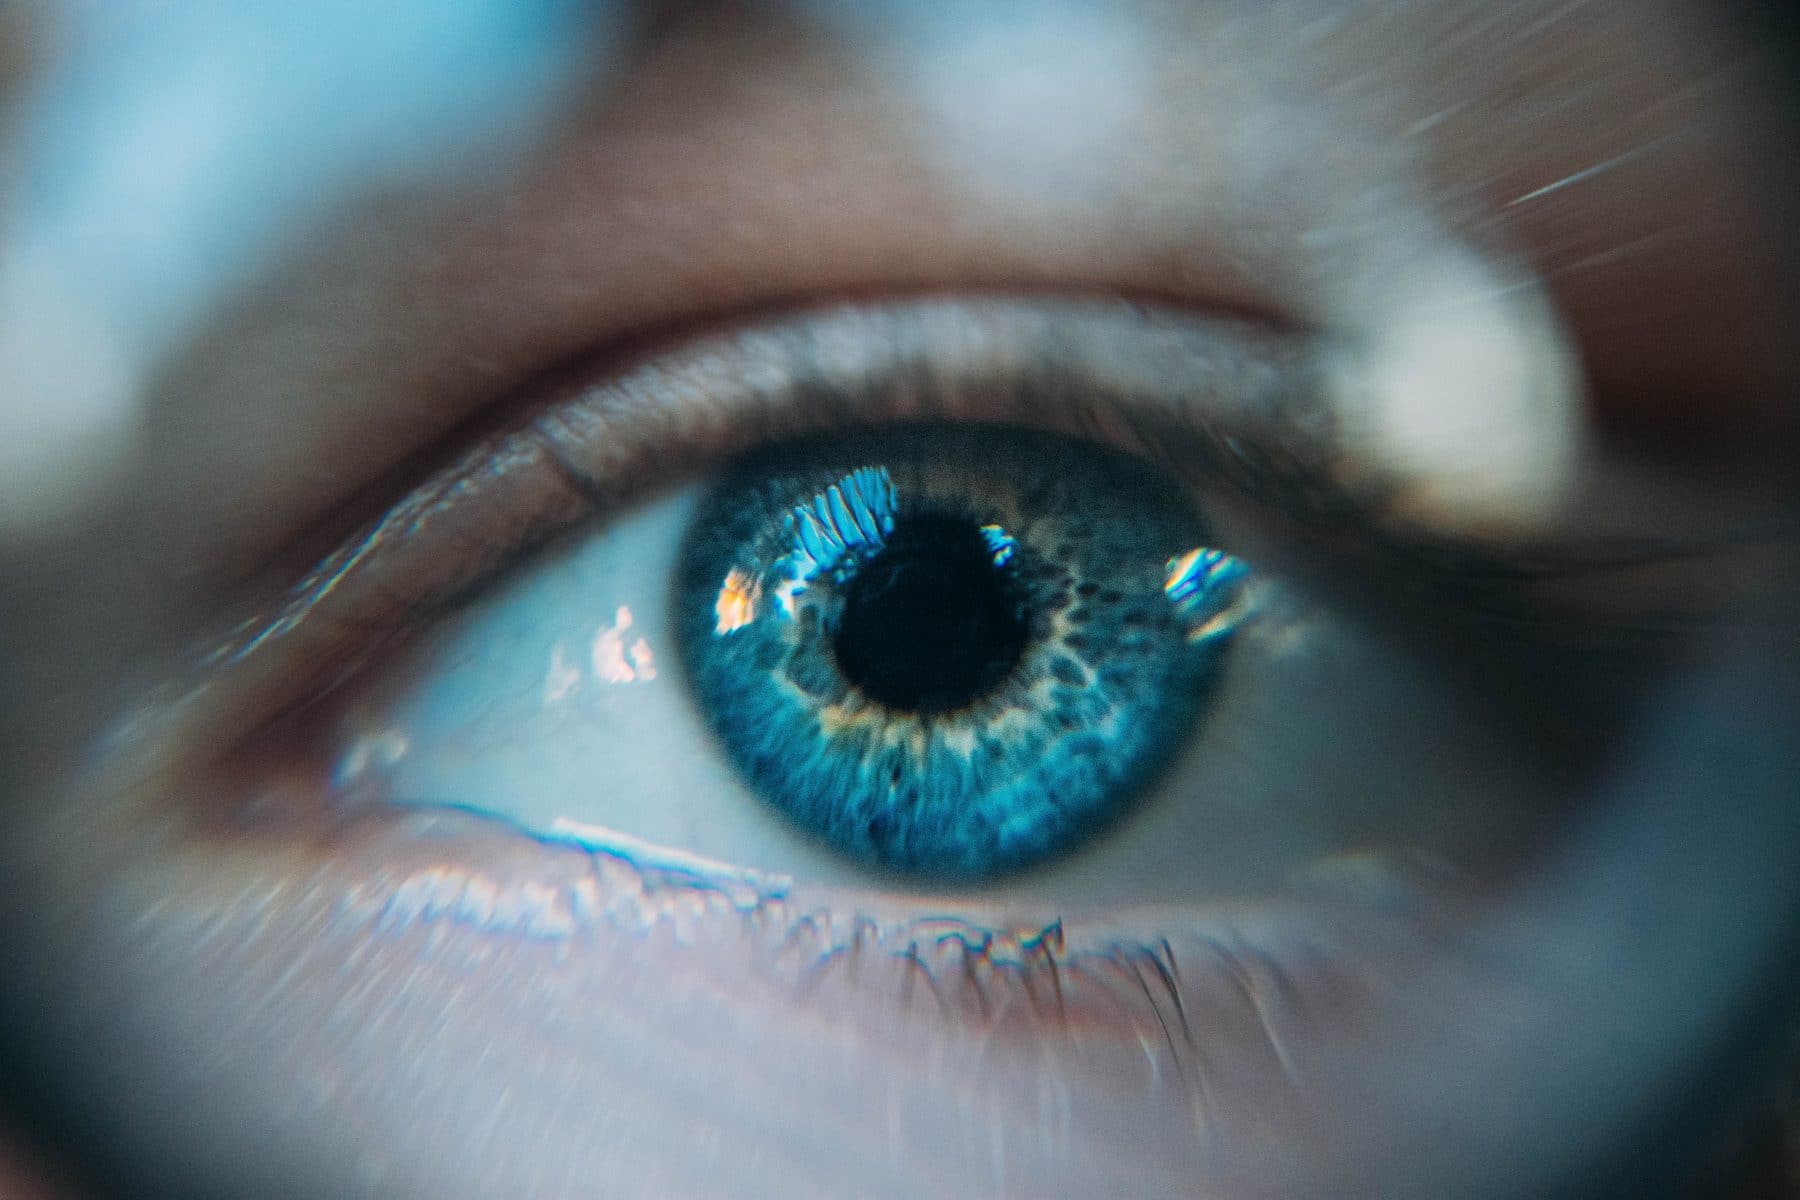 Glaucoma Awareness Month: Facts You Need to Know About This Silent Disease